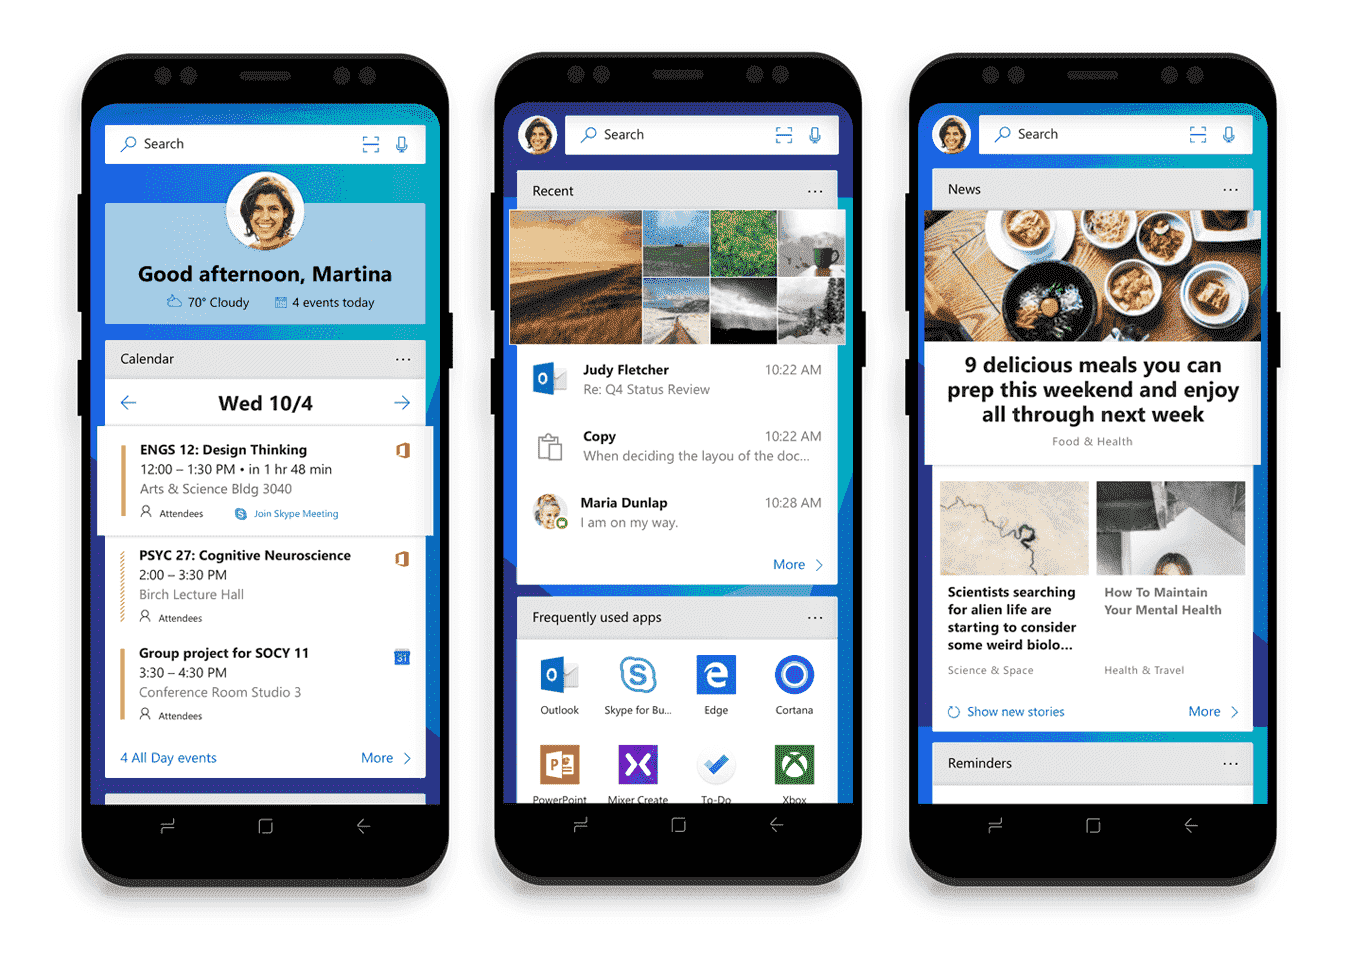 New Microsoft Launcher 4.13.1.45878 version for Android - October 16 8268874d2e645d4bb0948d74441562cd.png